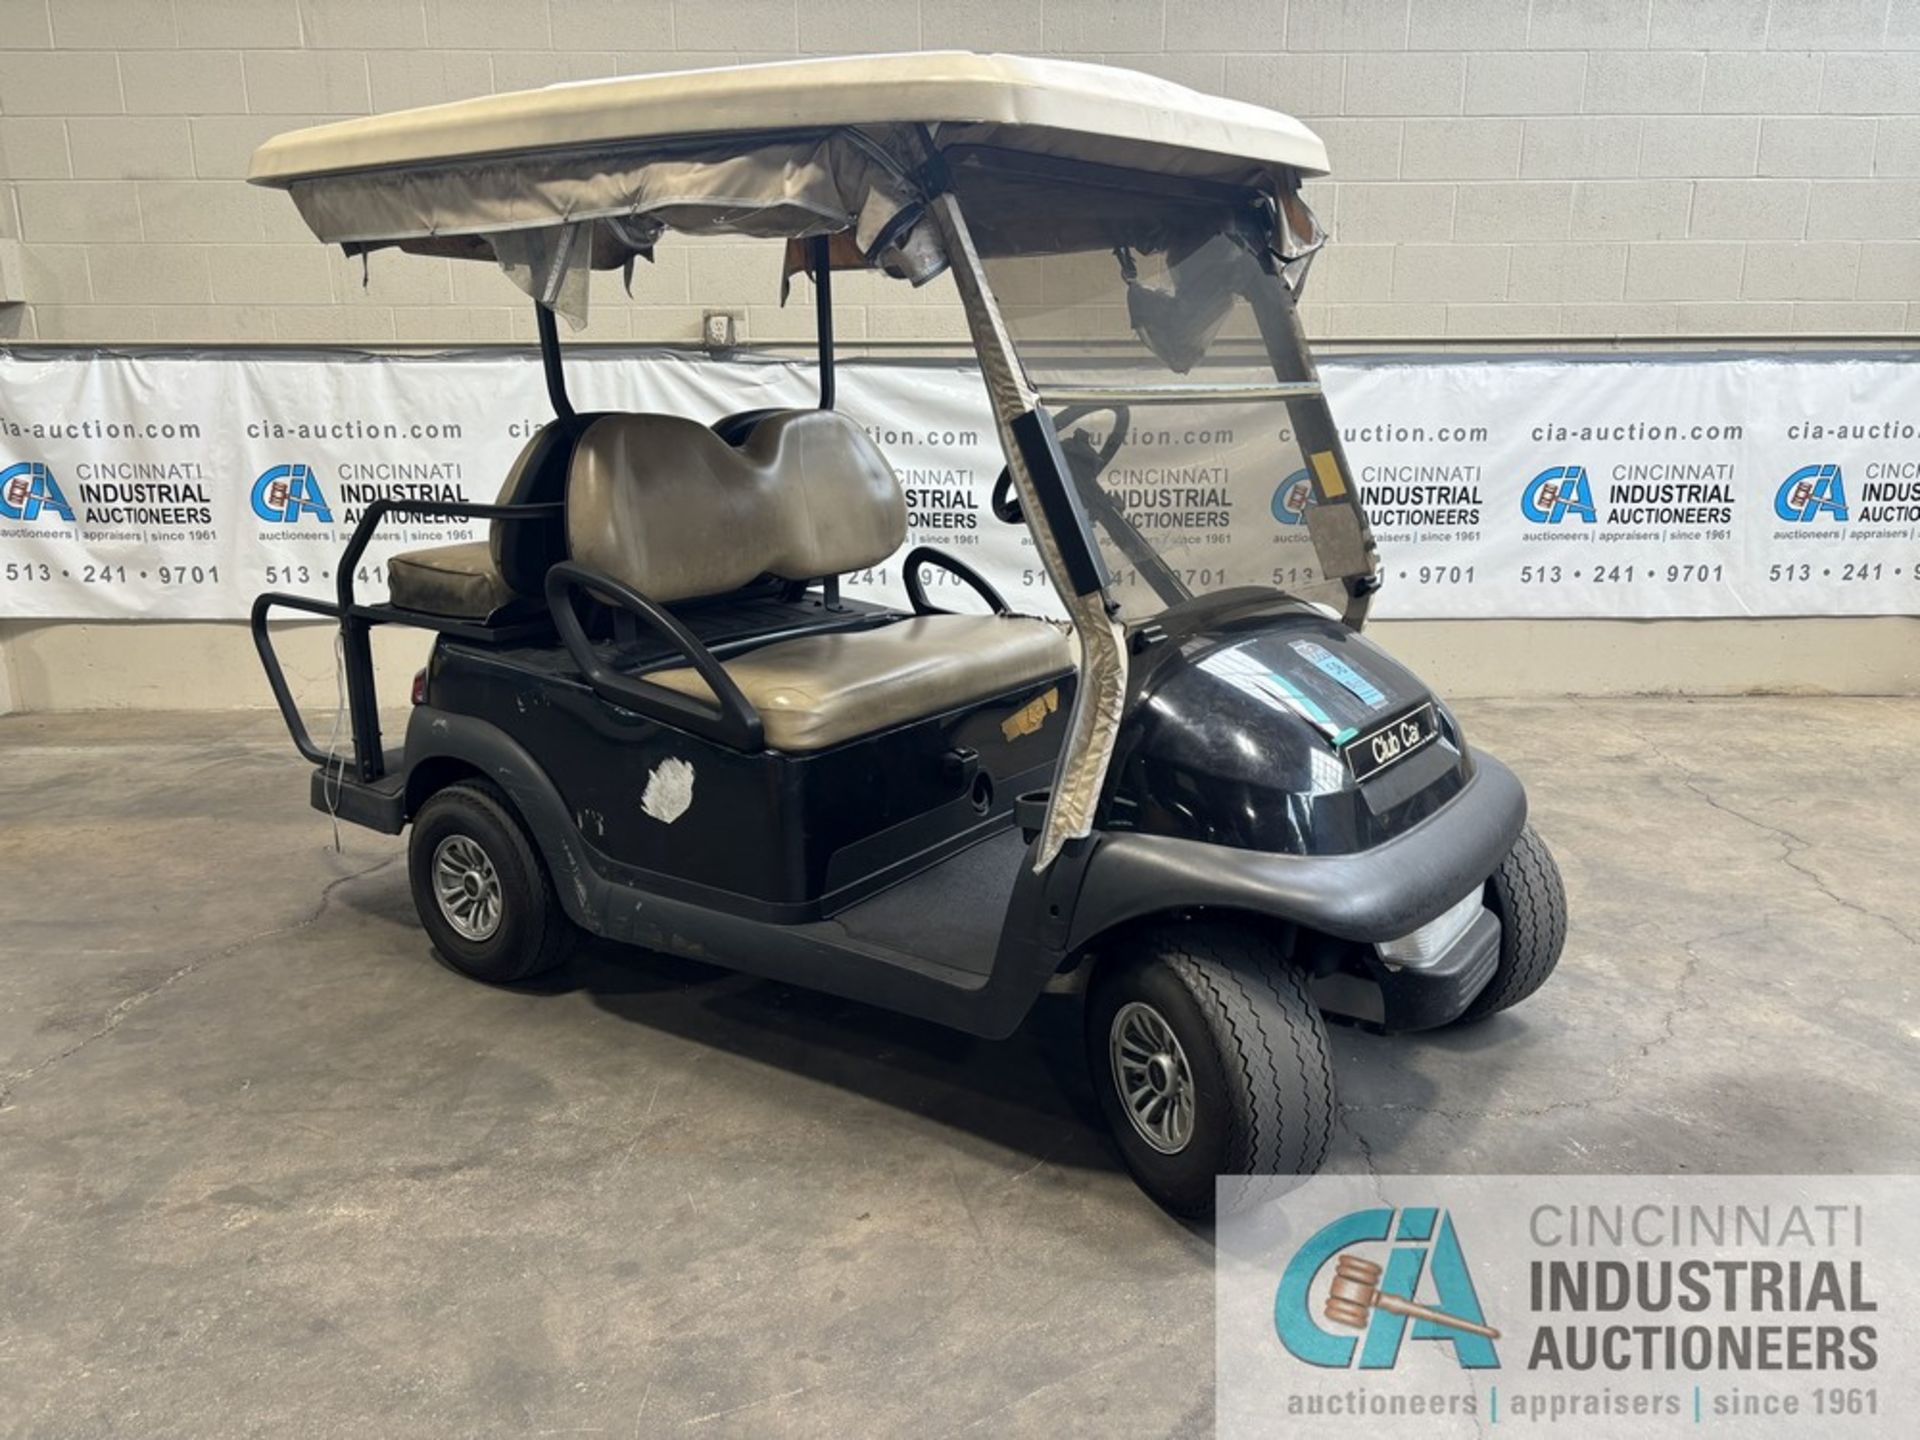 2015 CLUB CAR FOUR-PASSENGER ELECTRIC GOLF CART; S/N JH1541-596913, 48-VOLT, HOURS N/A, No Charger